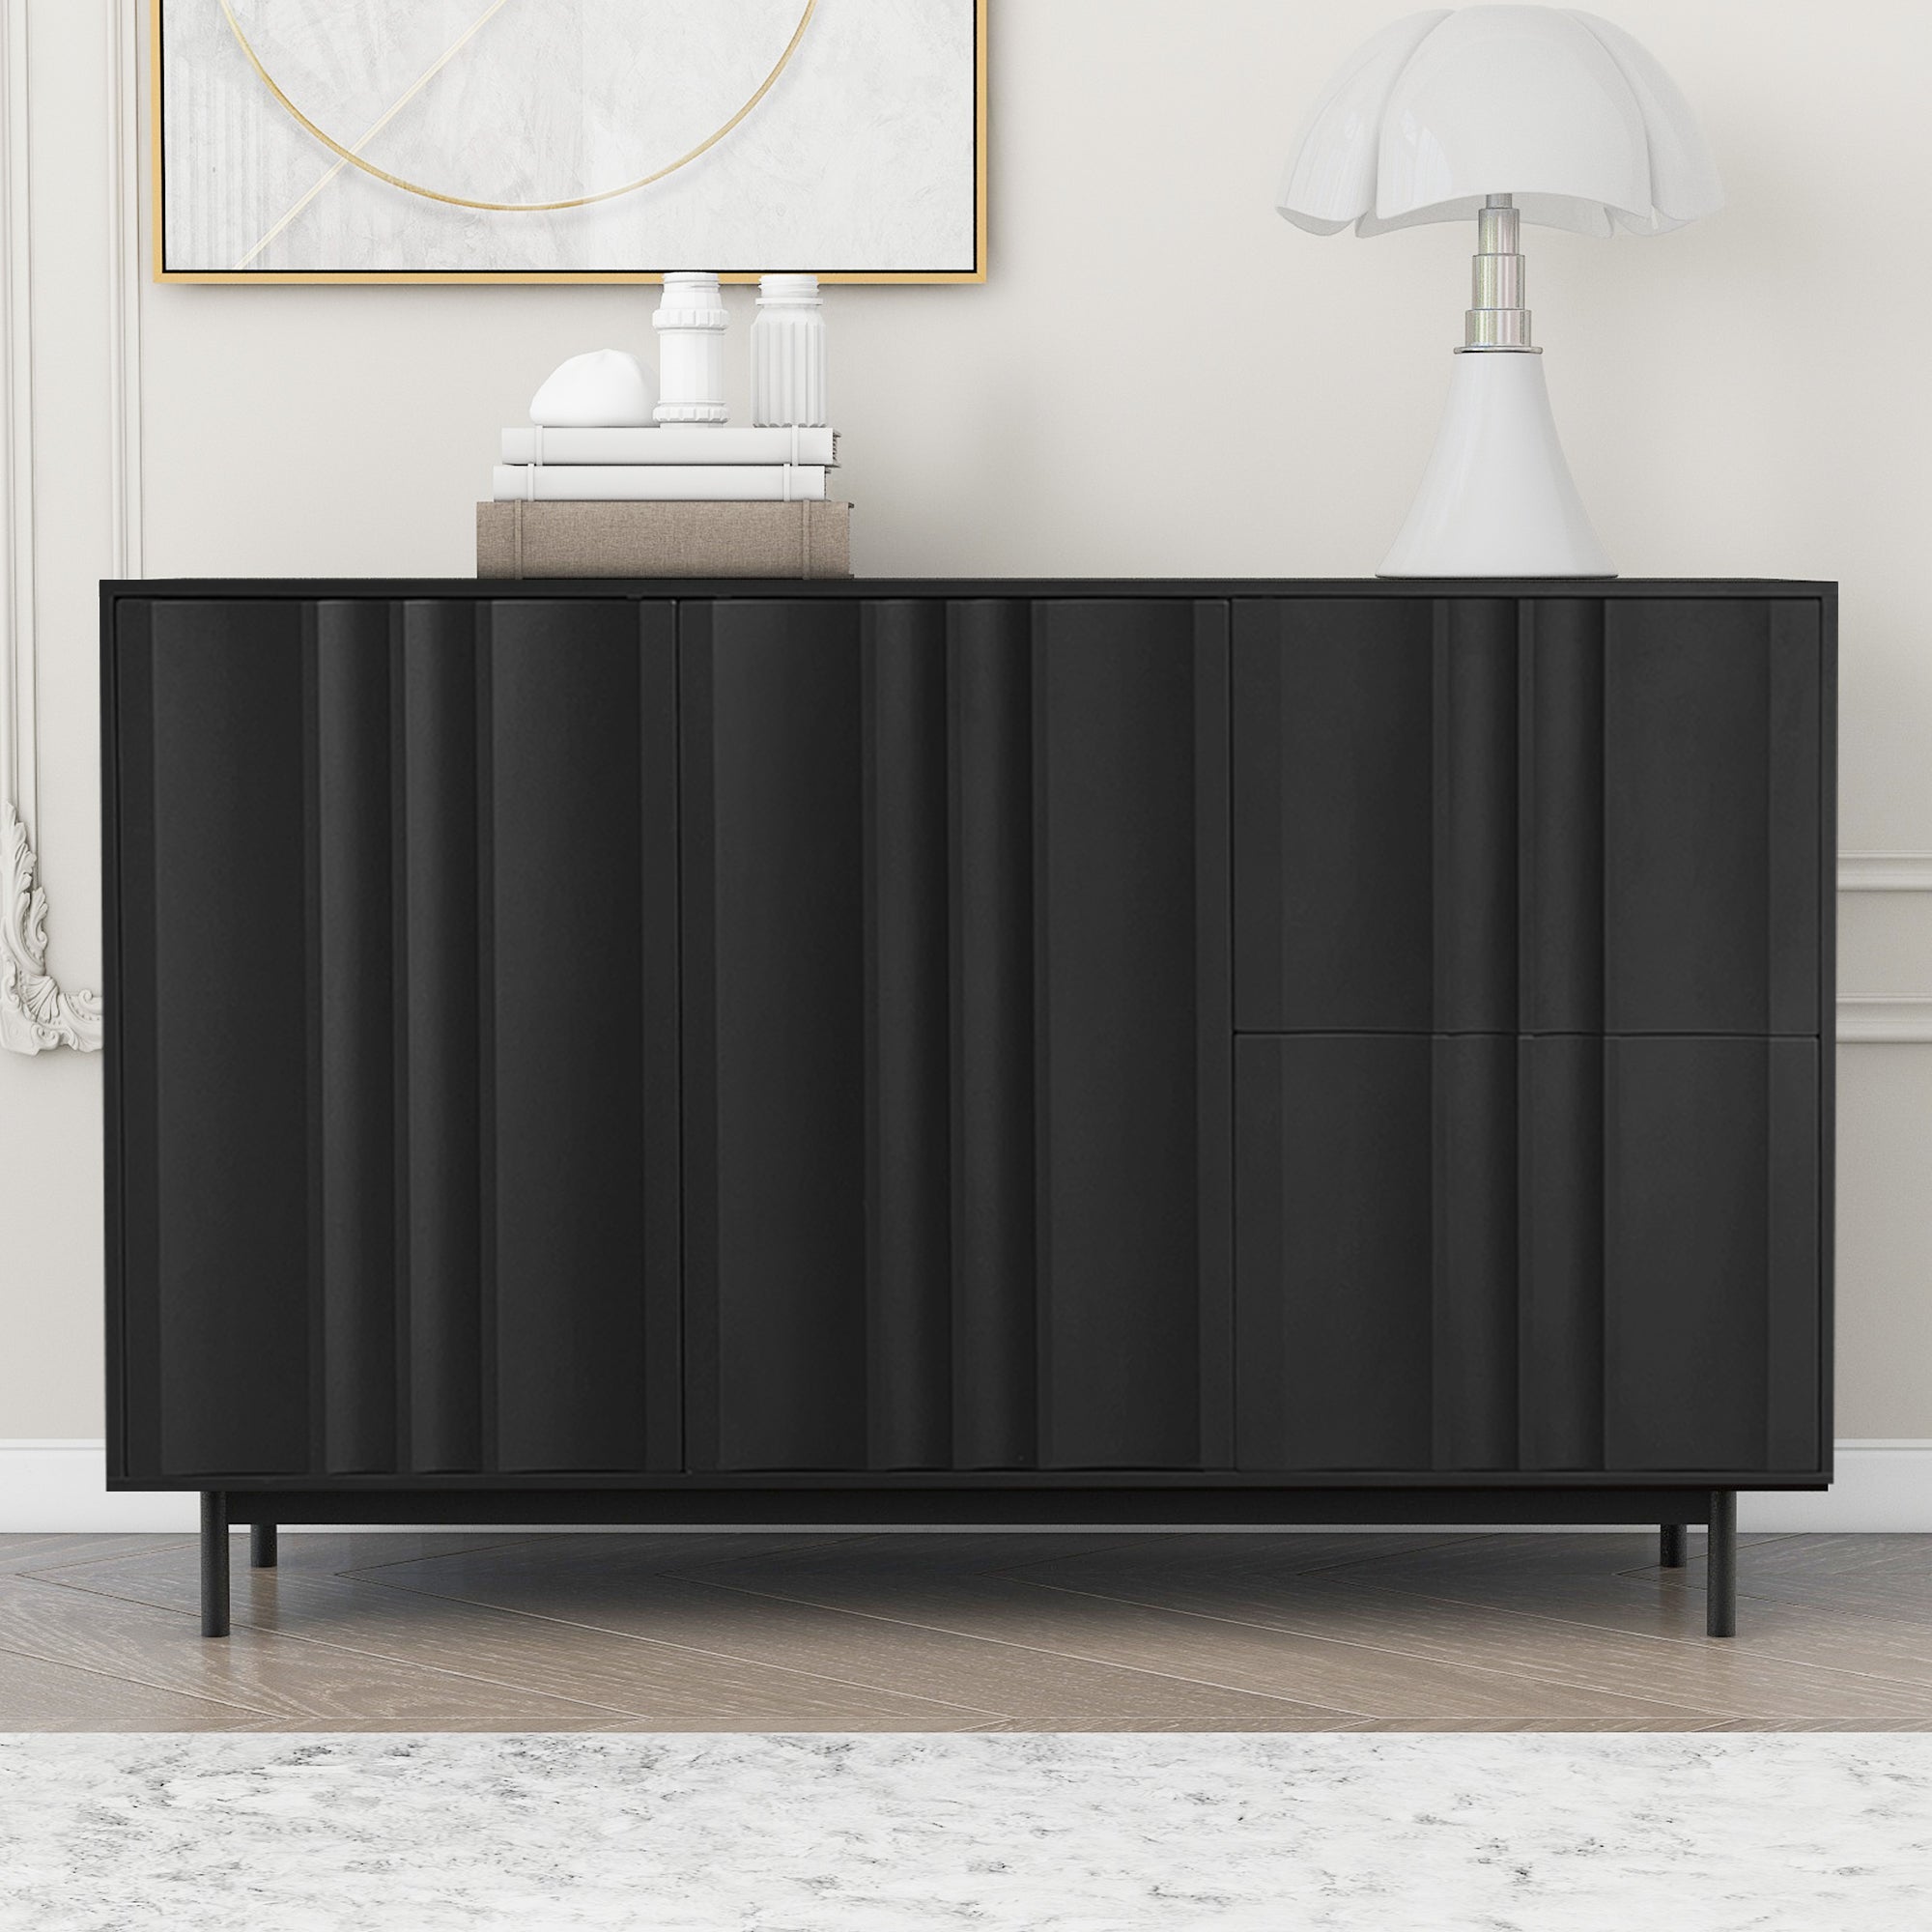 U STYLE Wave Pattern Storage Cabinet with 2 Doors and black-mdf